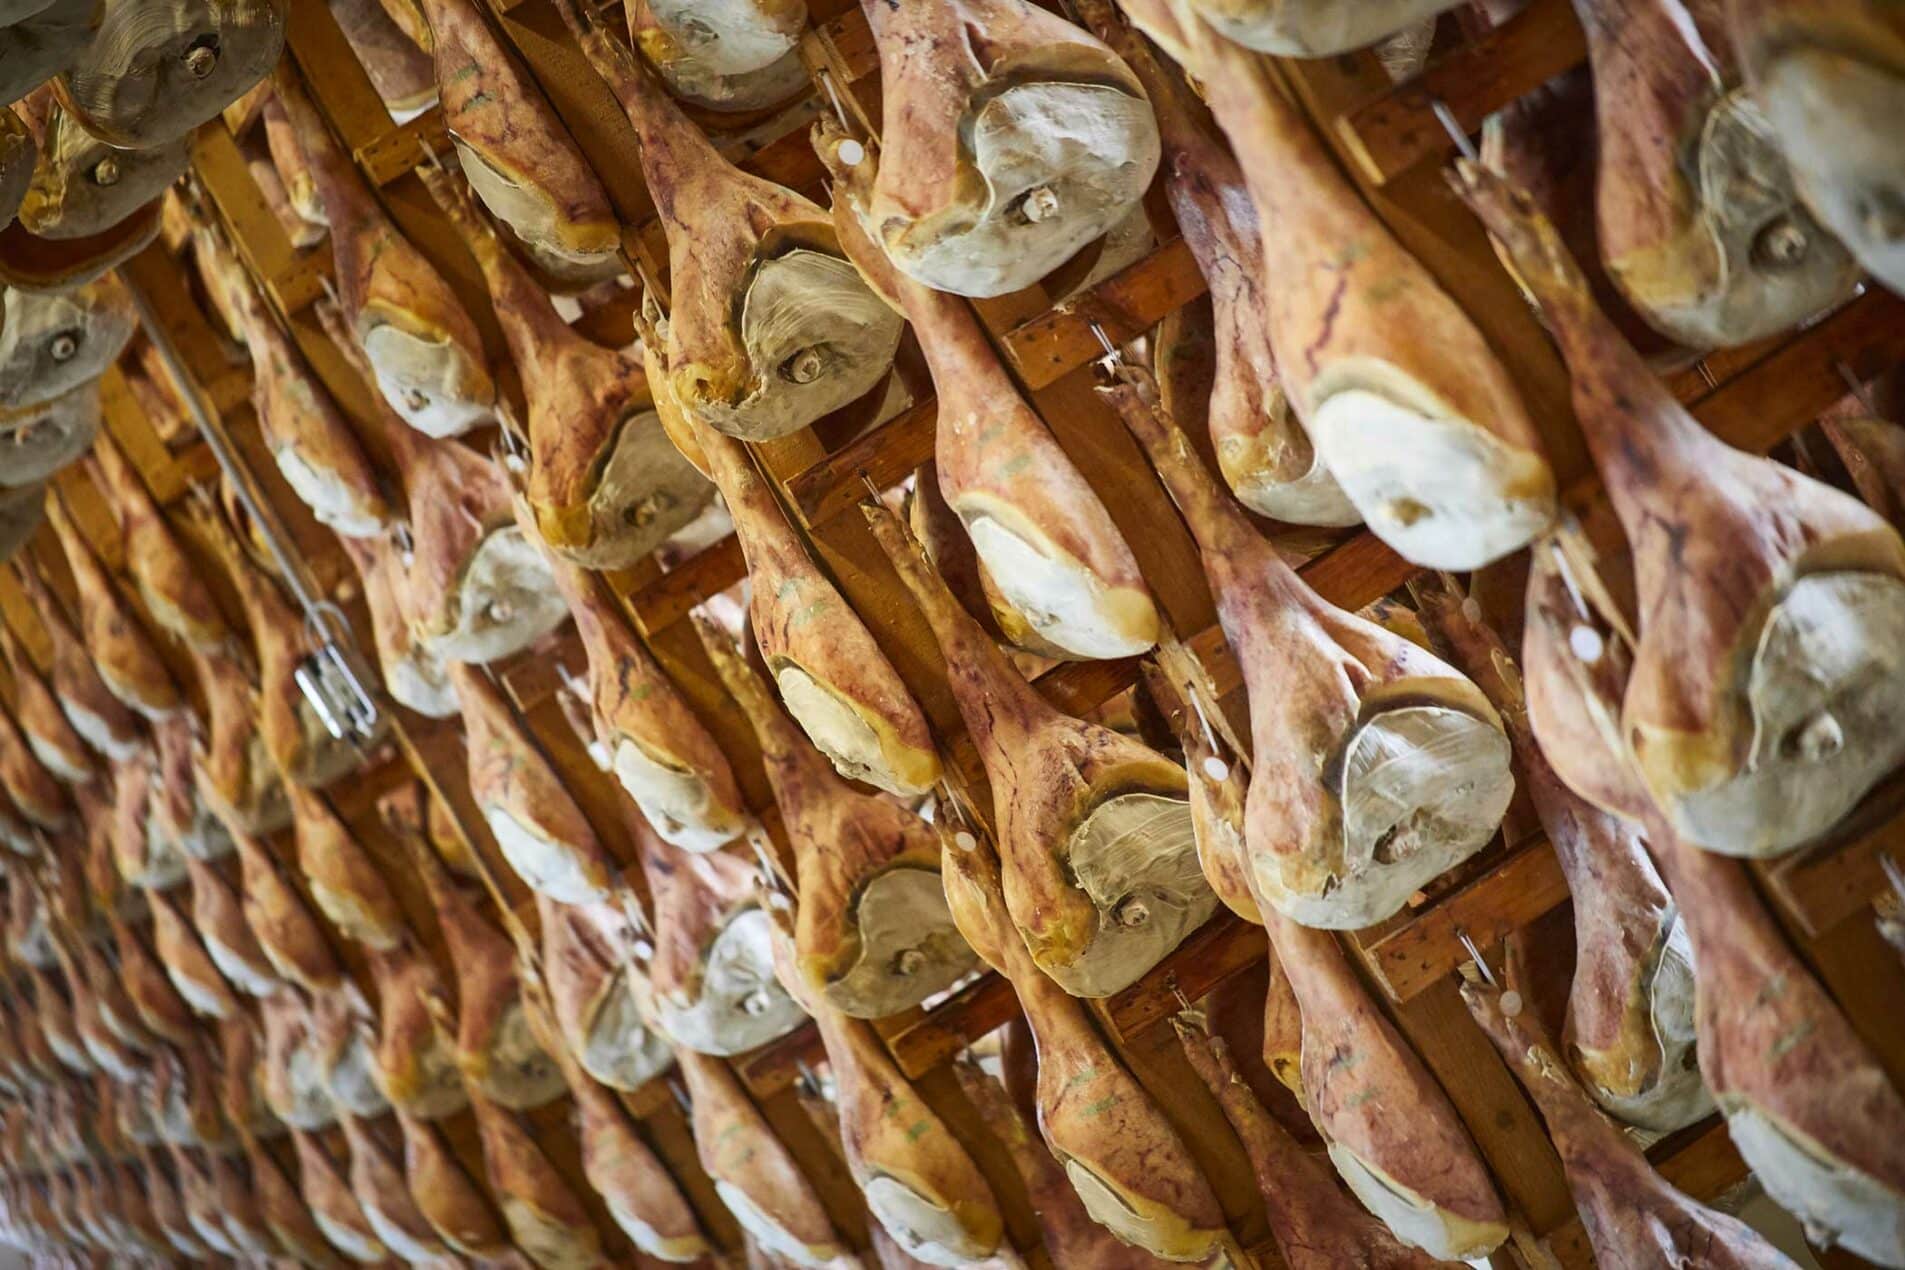 The first stages of the production of Prosciutto di San Daniele